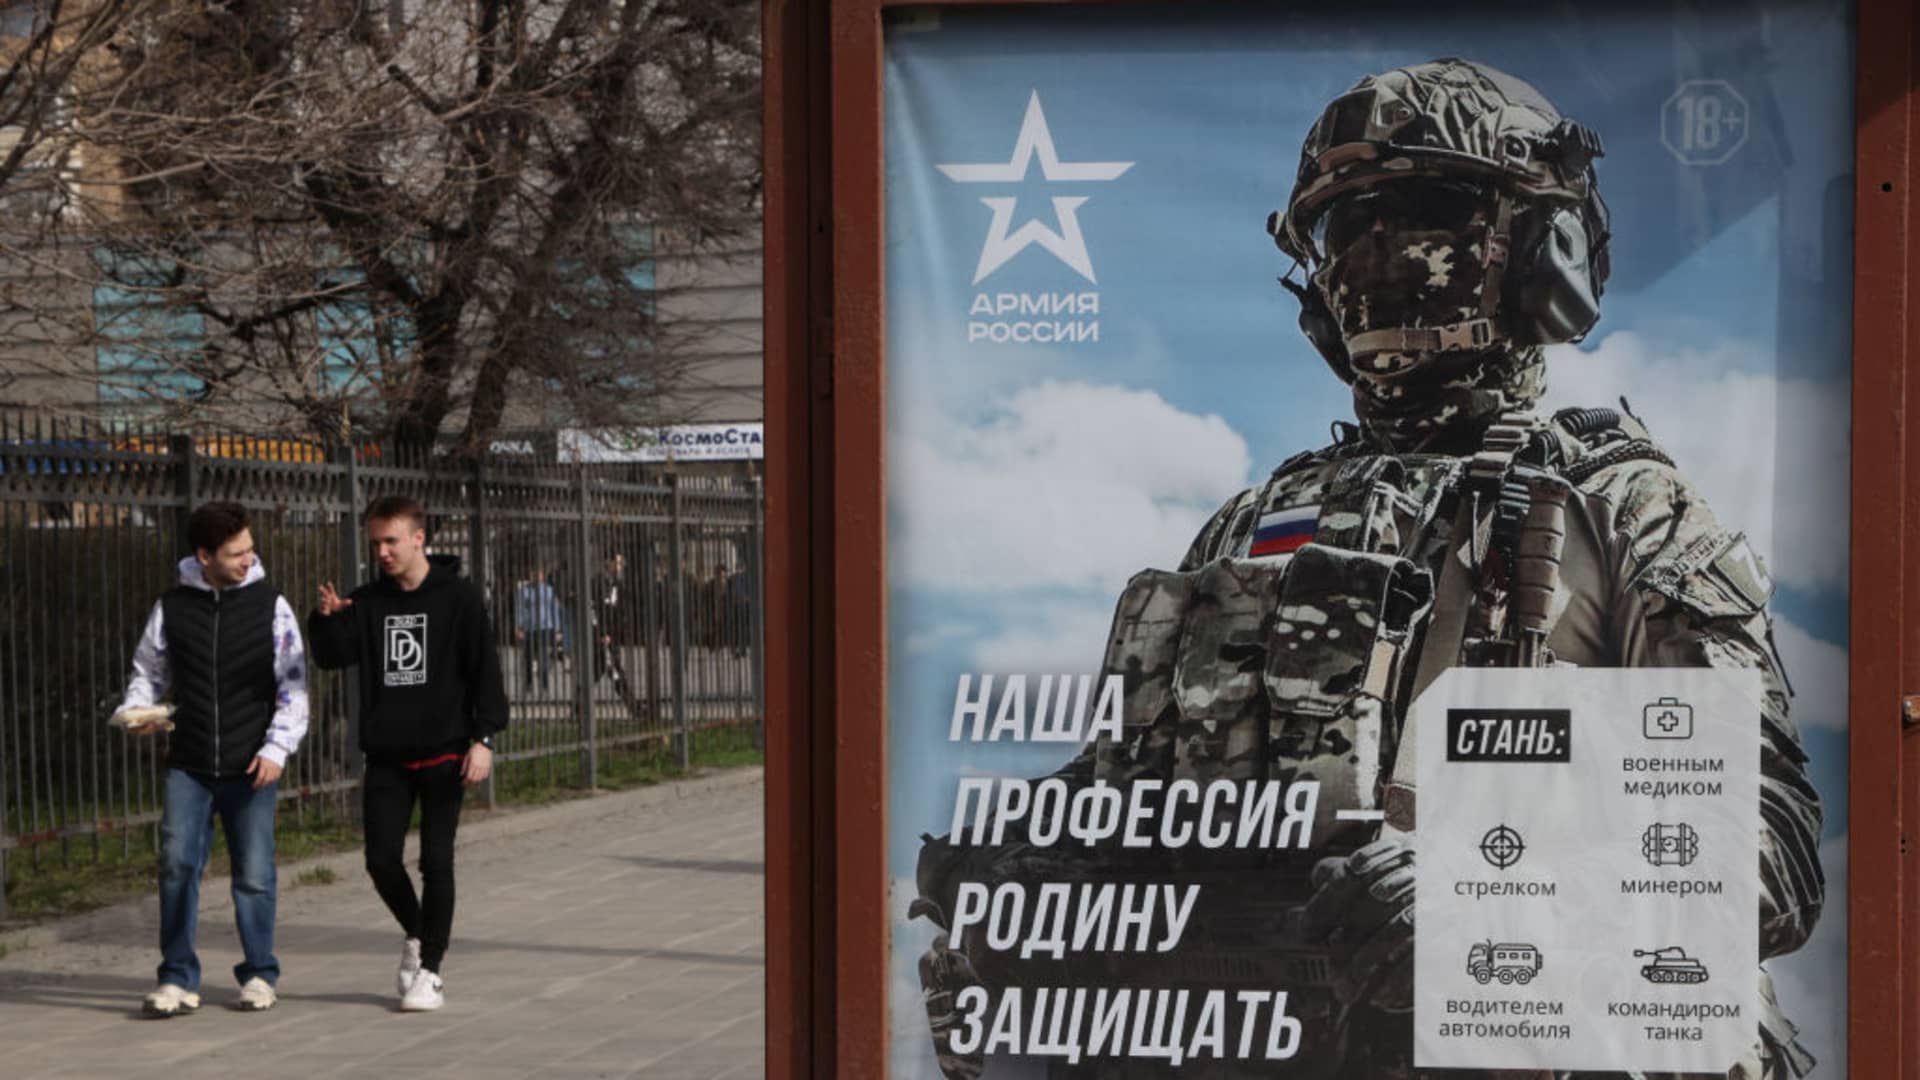 Be ‘a real man,’ Russia tells potential recruits as it looks to bolster armed forces